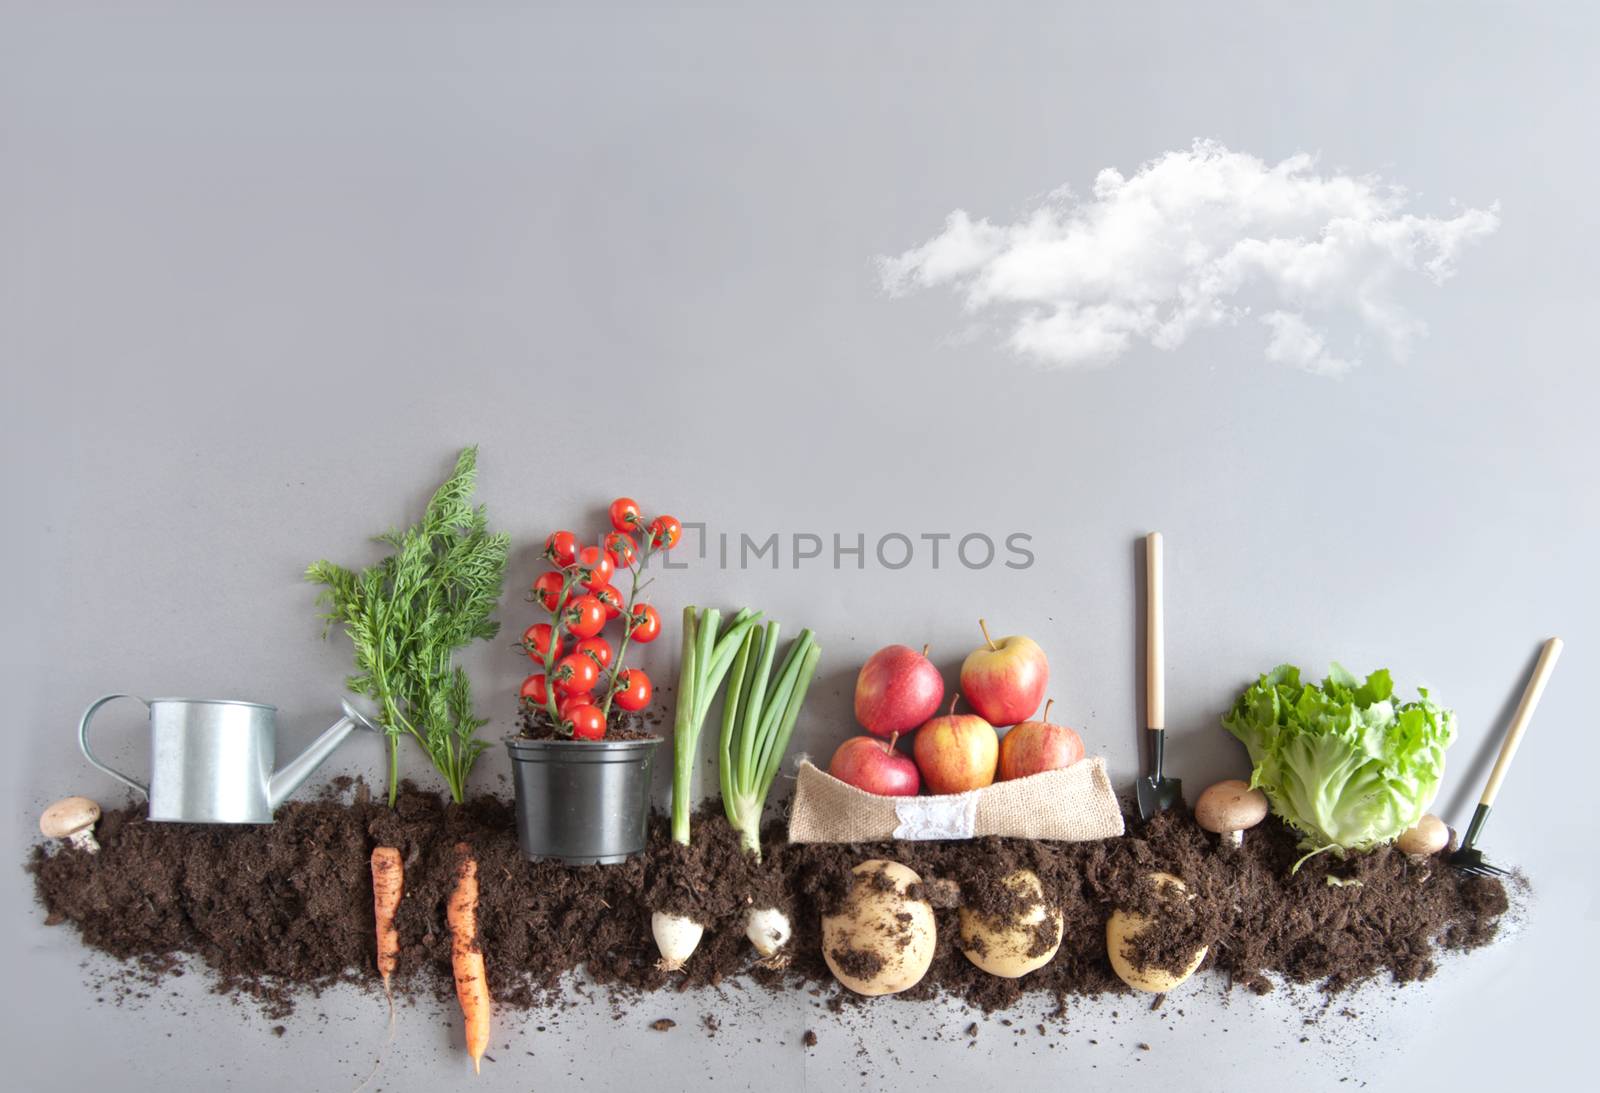 Fruits and vegetables growing in compost including carrots, mushrooms, potatoes and lettuce